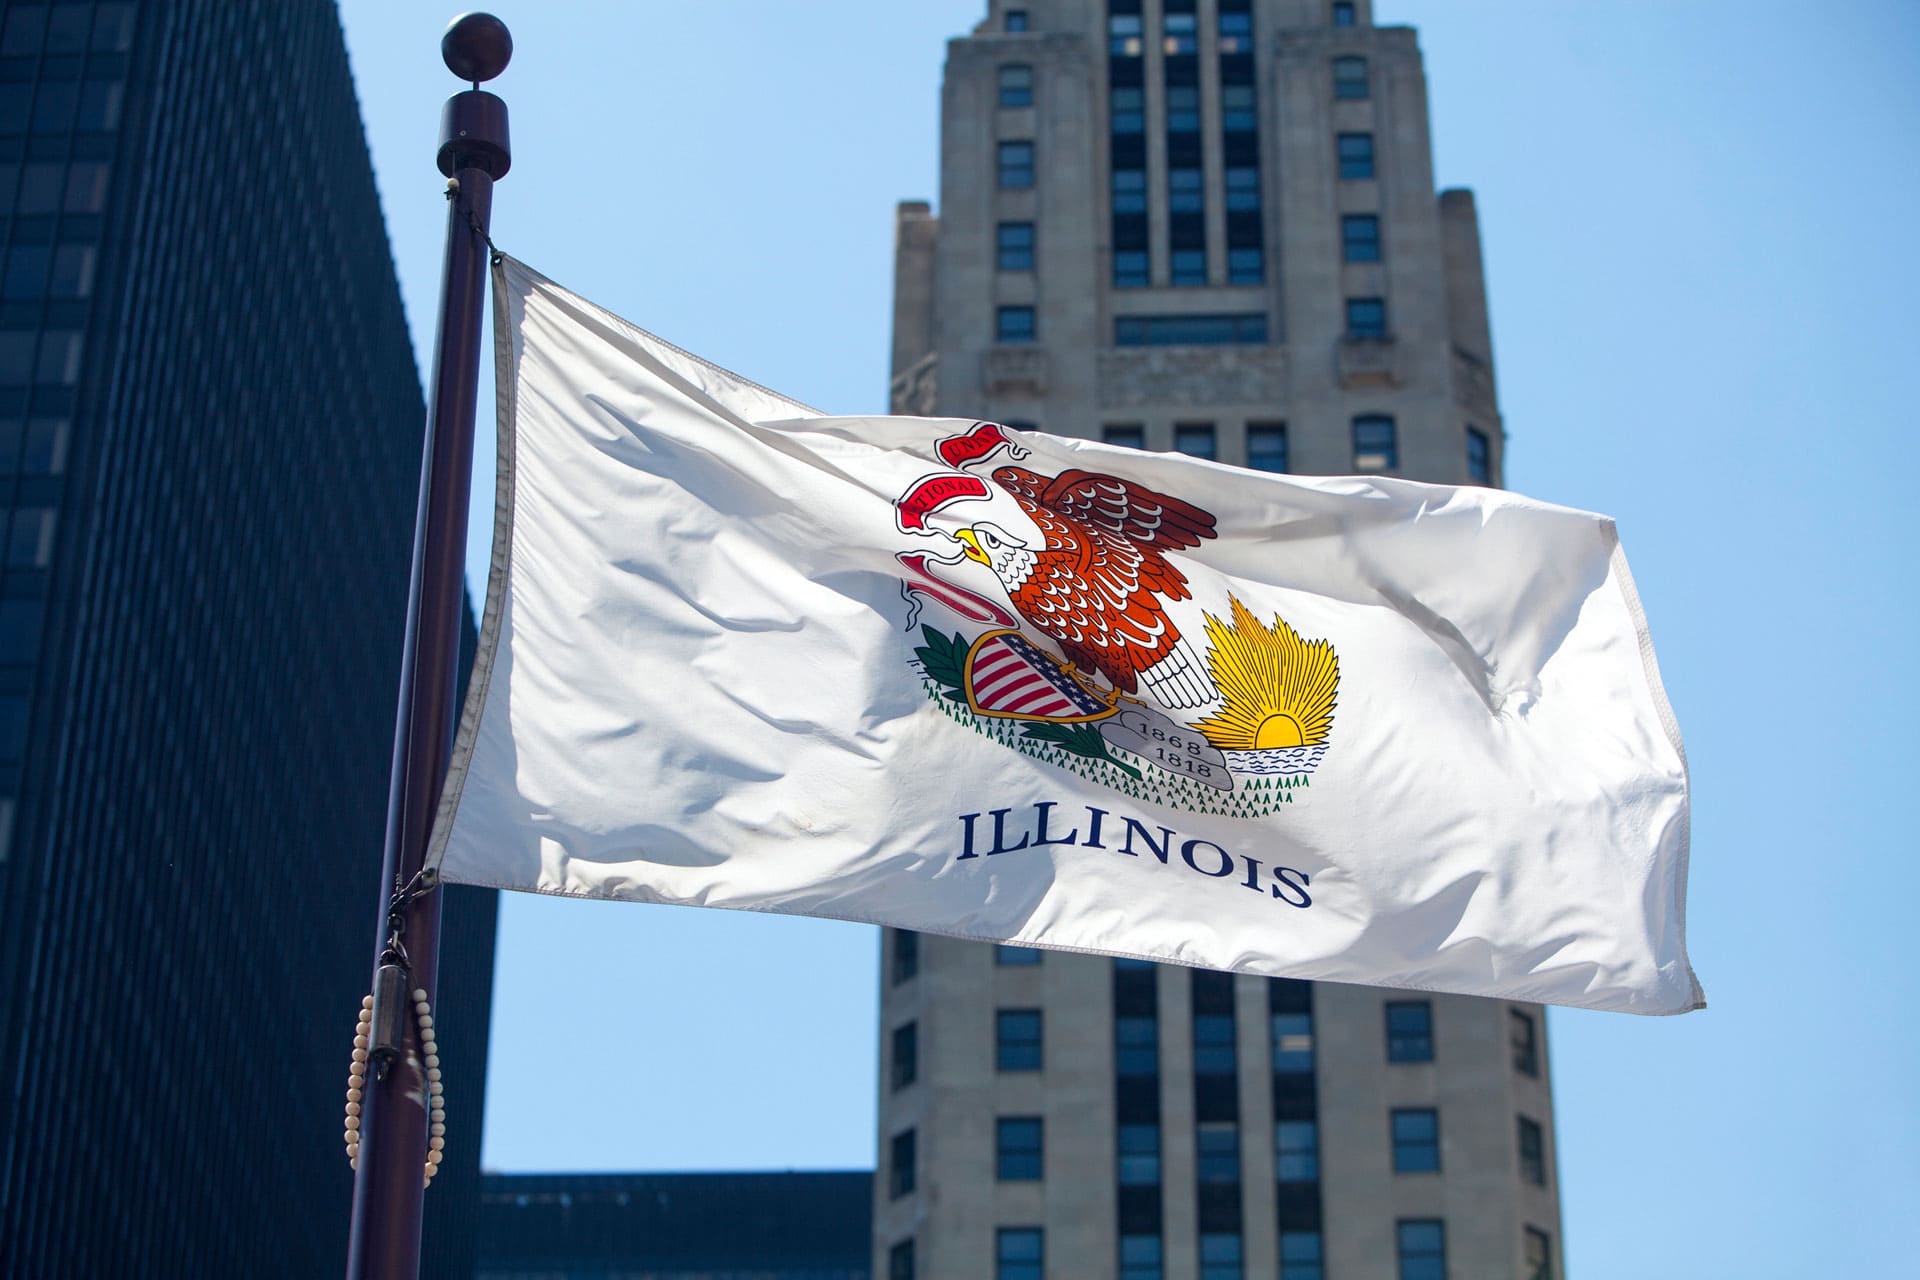 Illinois Flag - Compliance deadlines for Illinois Equal Pay Act amendments approaching 